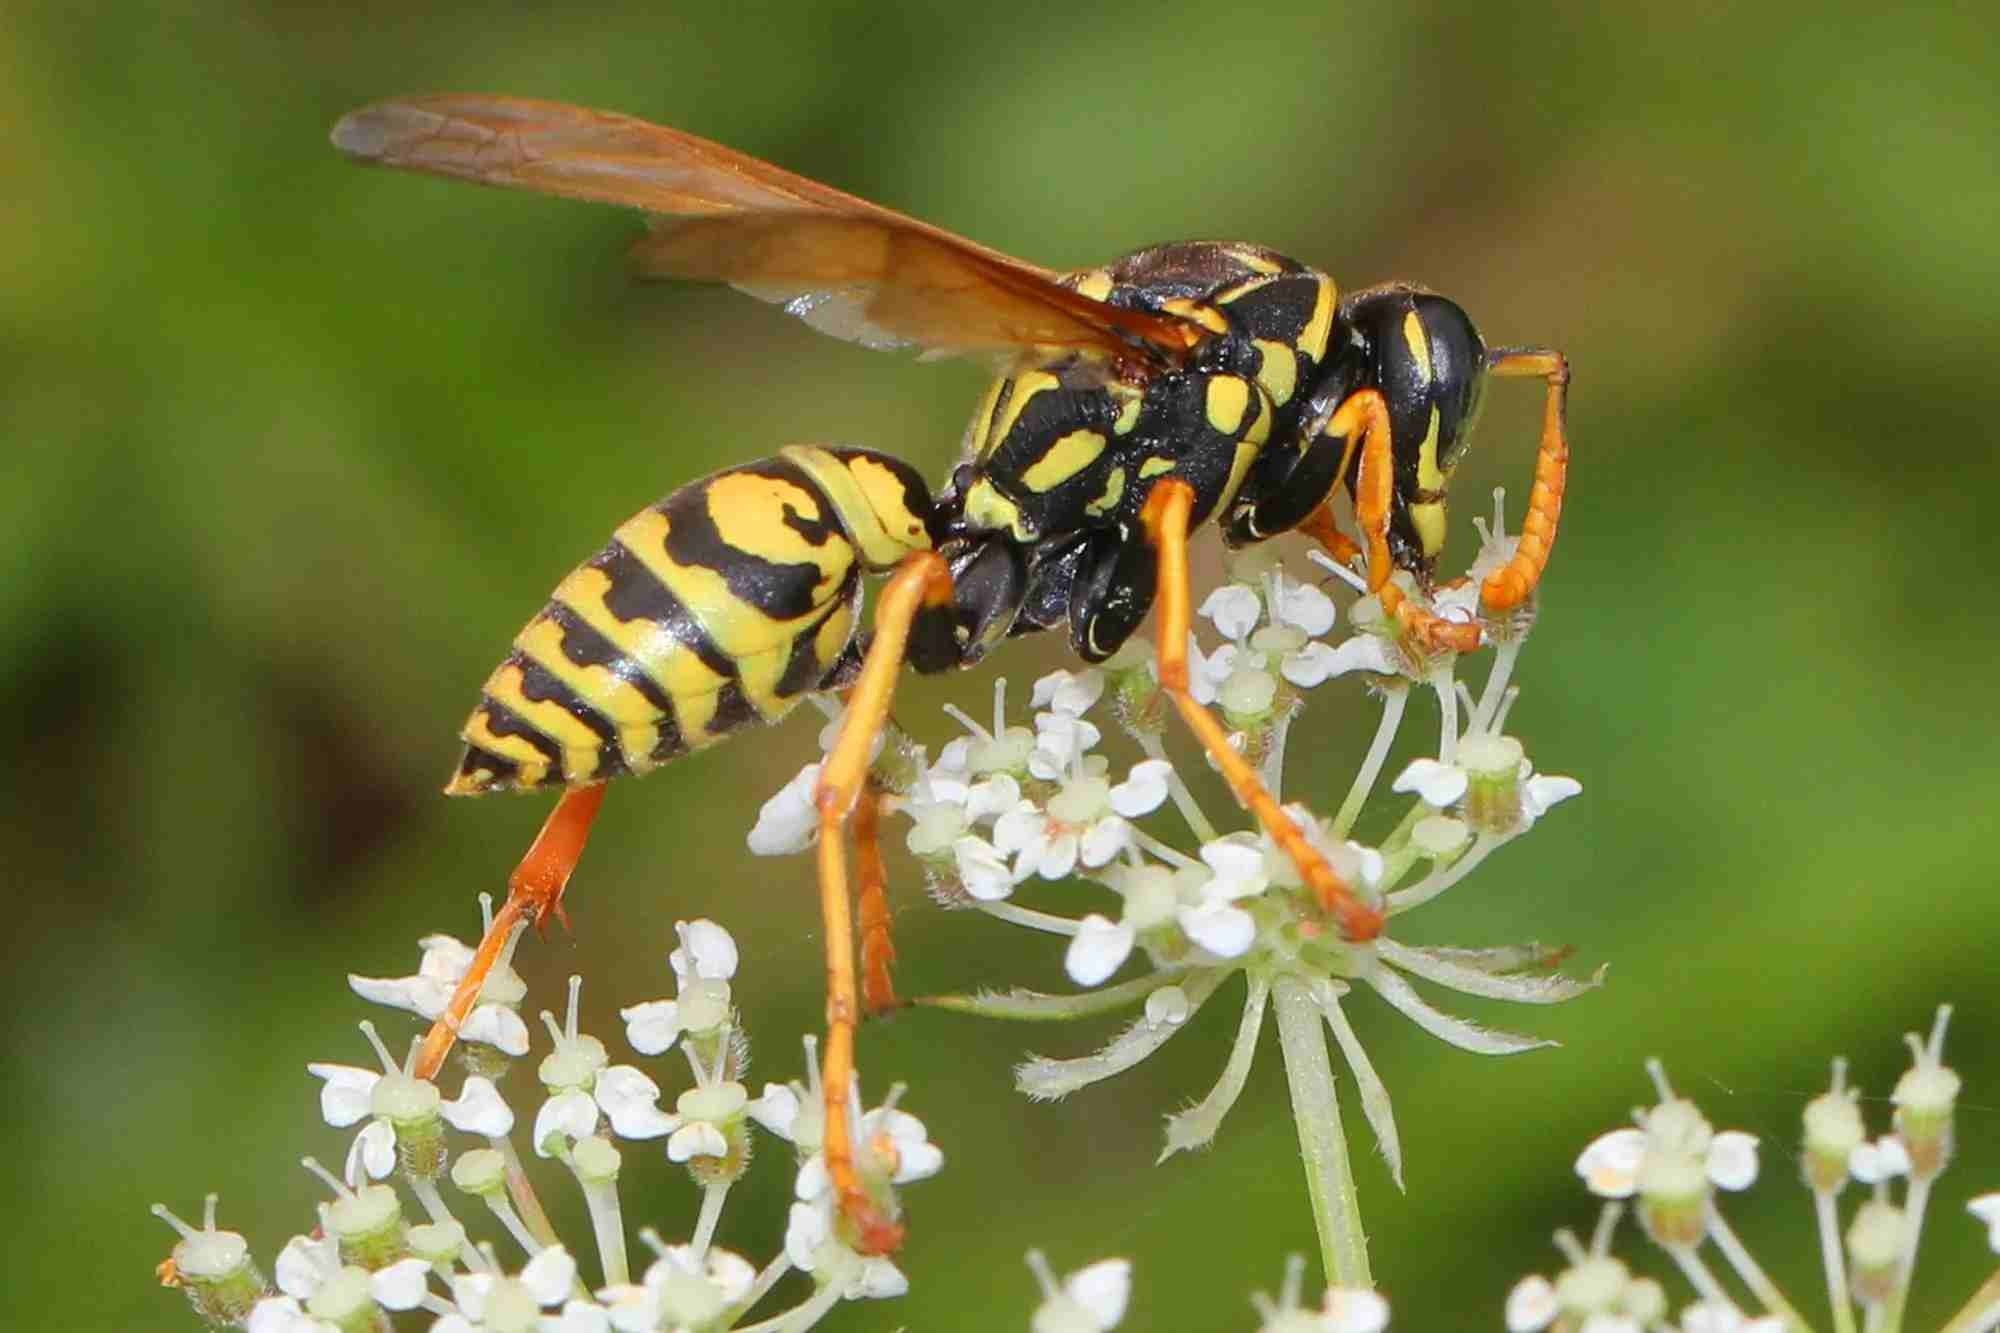 wasps having black body with yellow rings